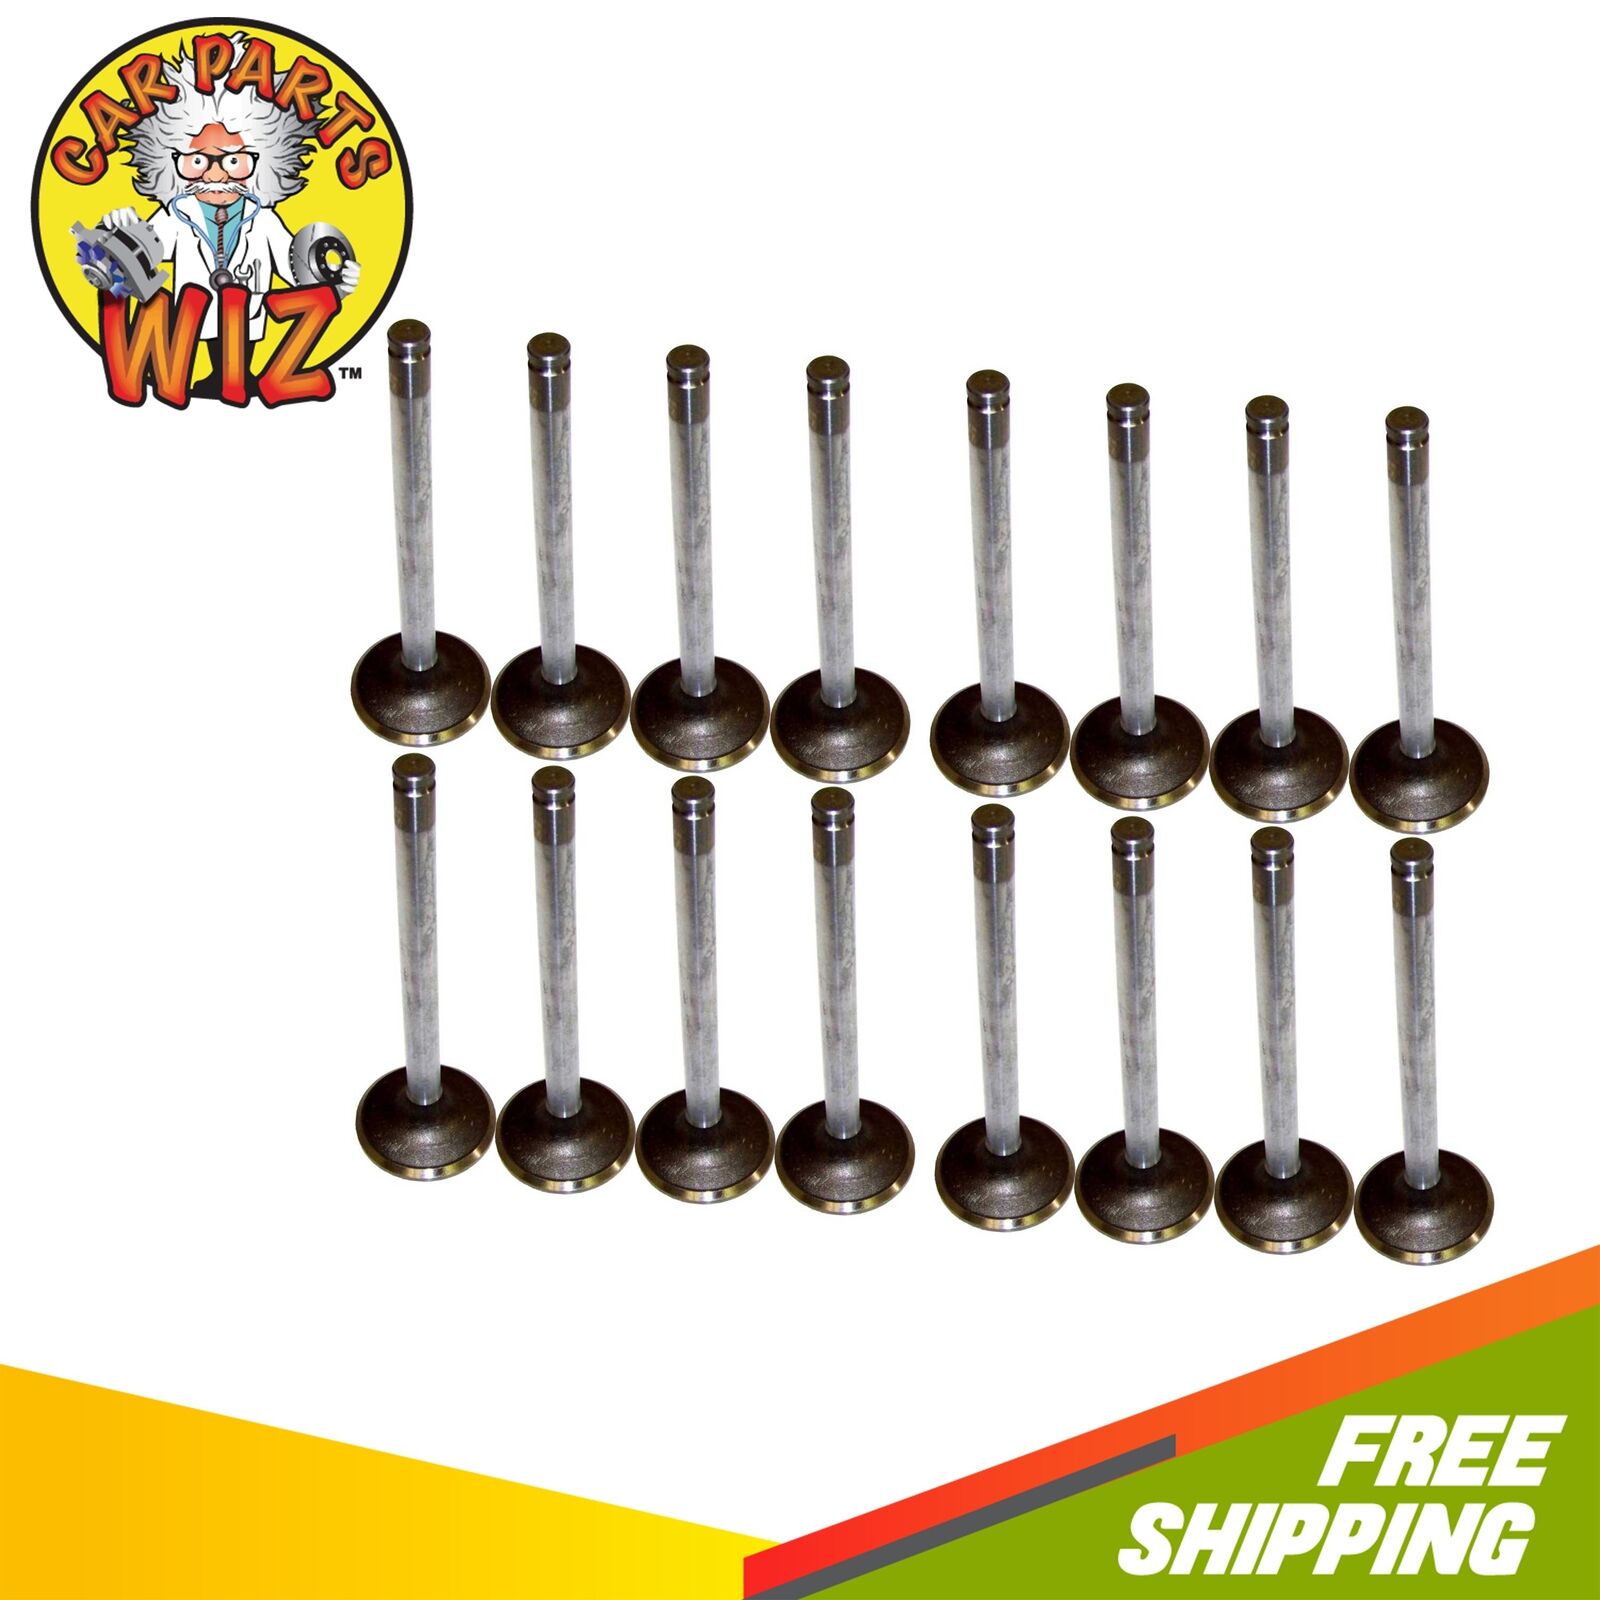 Exhaust and Intake Valves Fits 90-95 Cadillac Fleetwood 4.5L 4.9L V8 OHV 16v